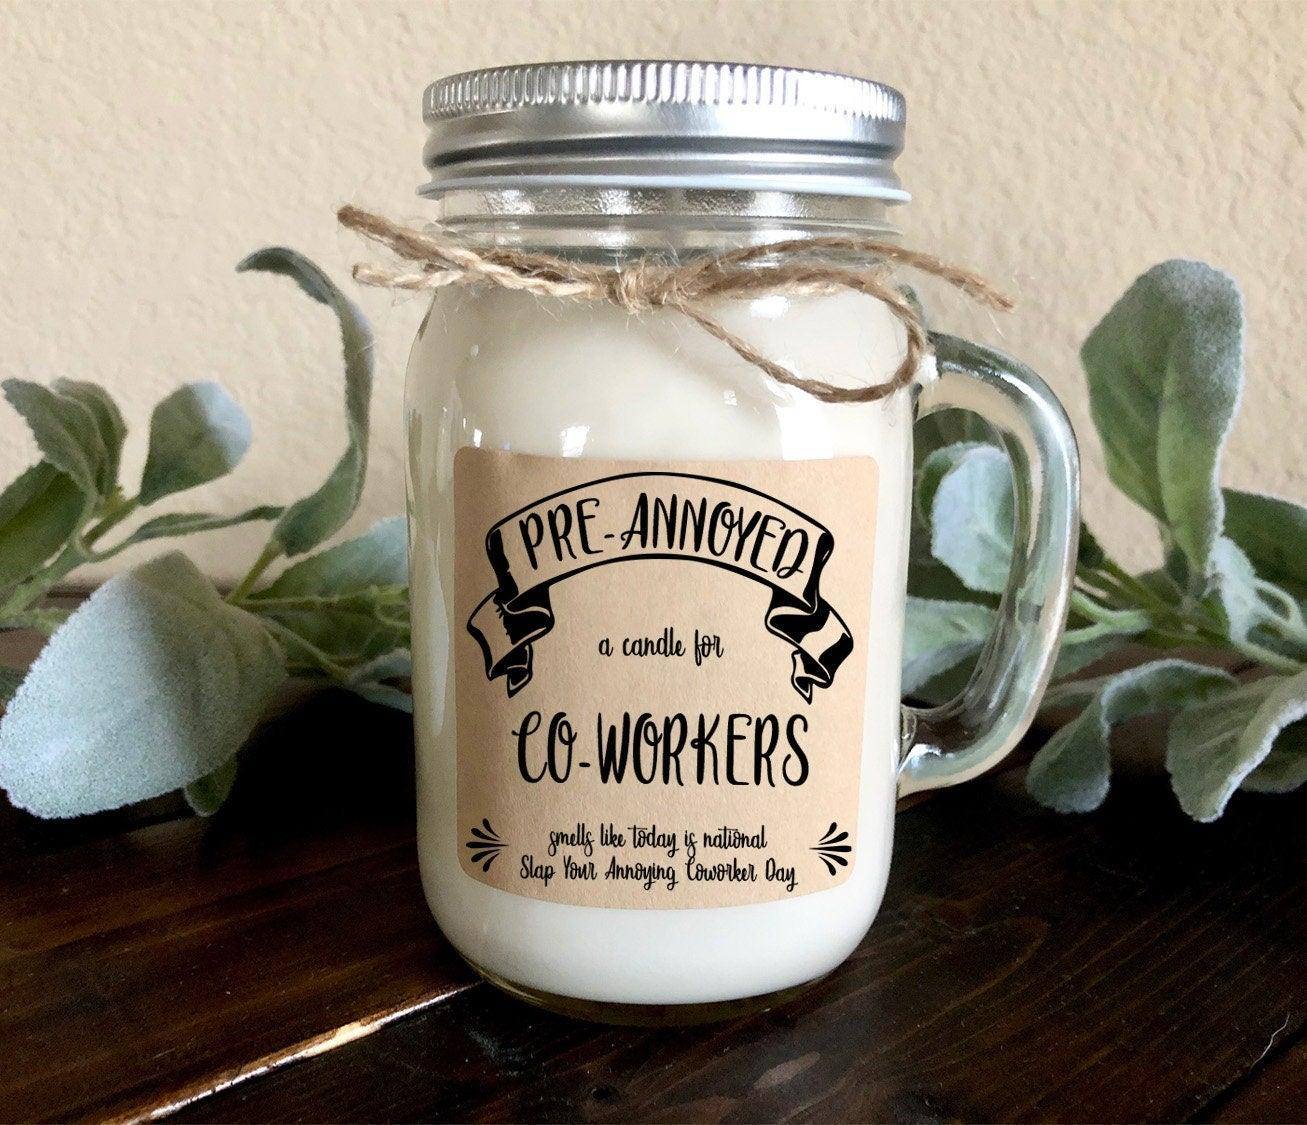 Funny Coworker Gift | Office Gift for Men or Women | Hand Poured Soy Candle